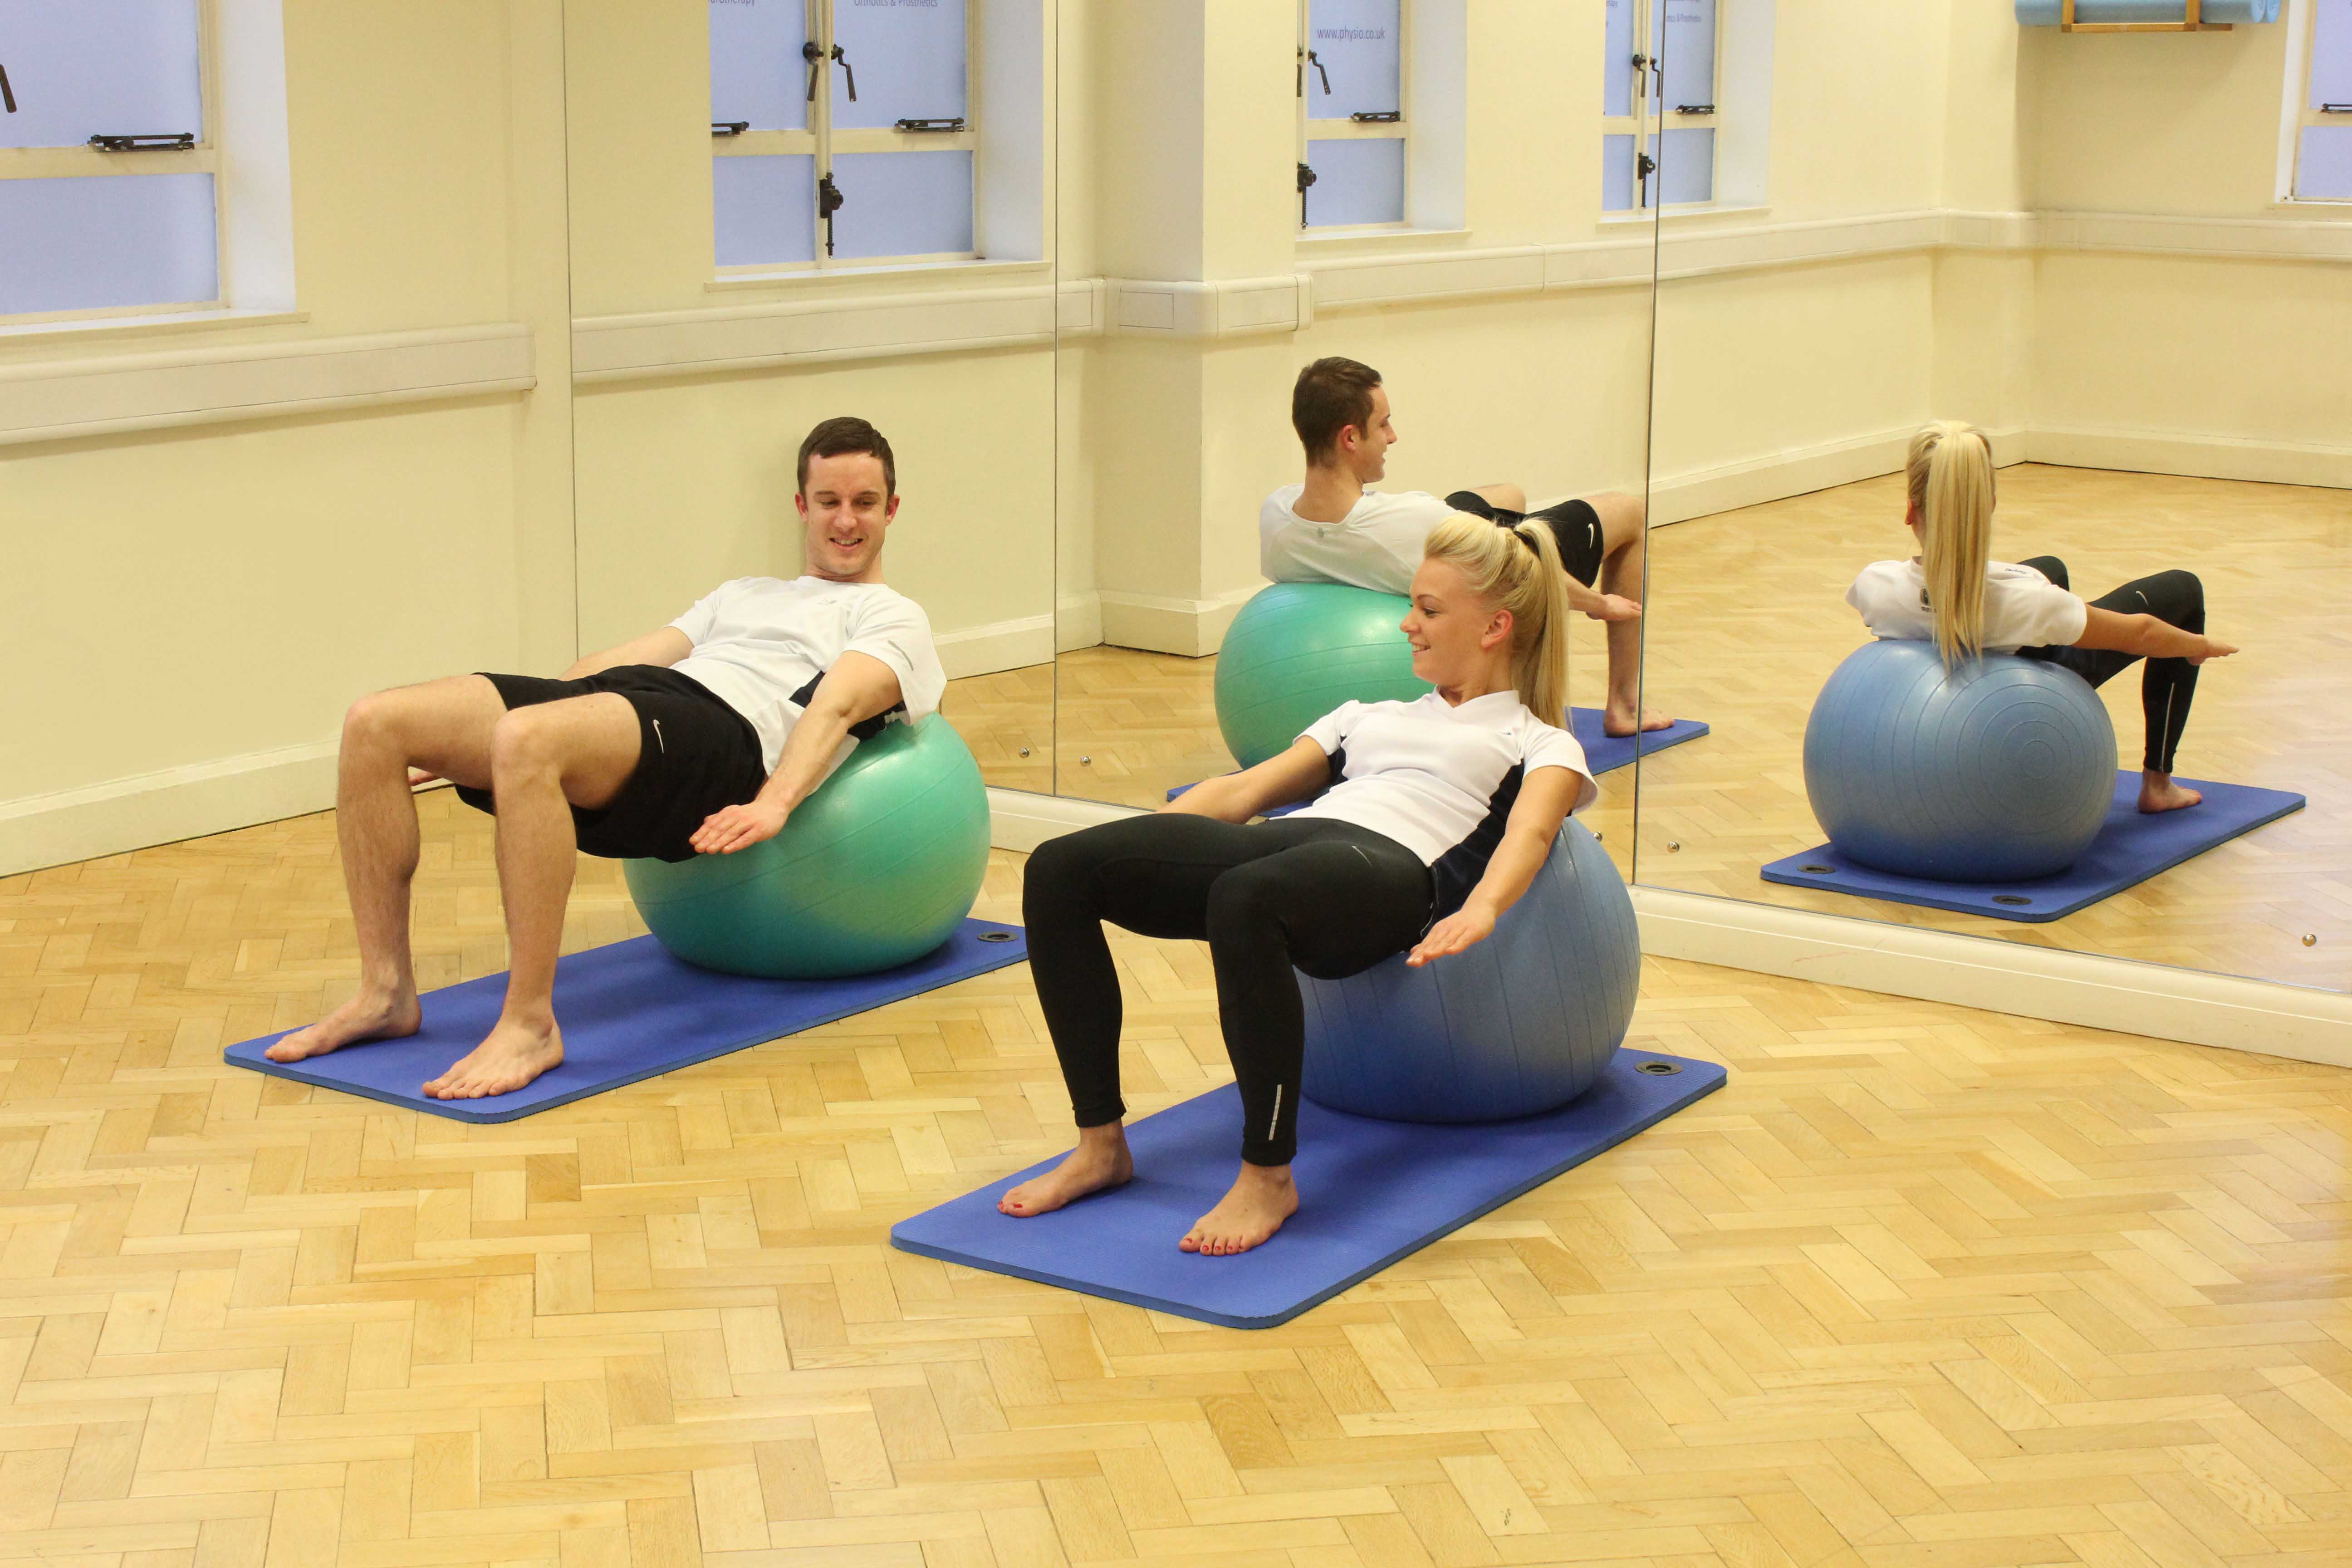 One to one physiolates sessions with a specialist Pilates qualified physiotherapist